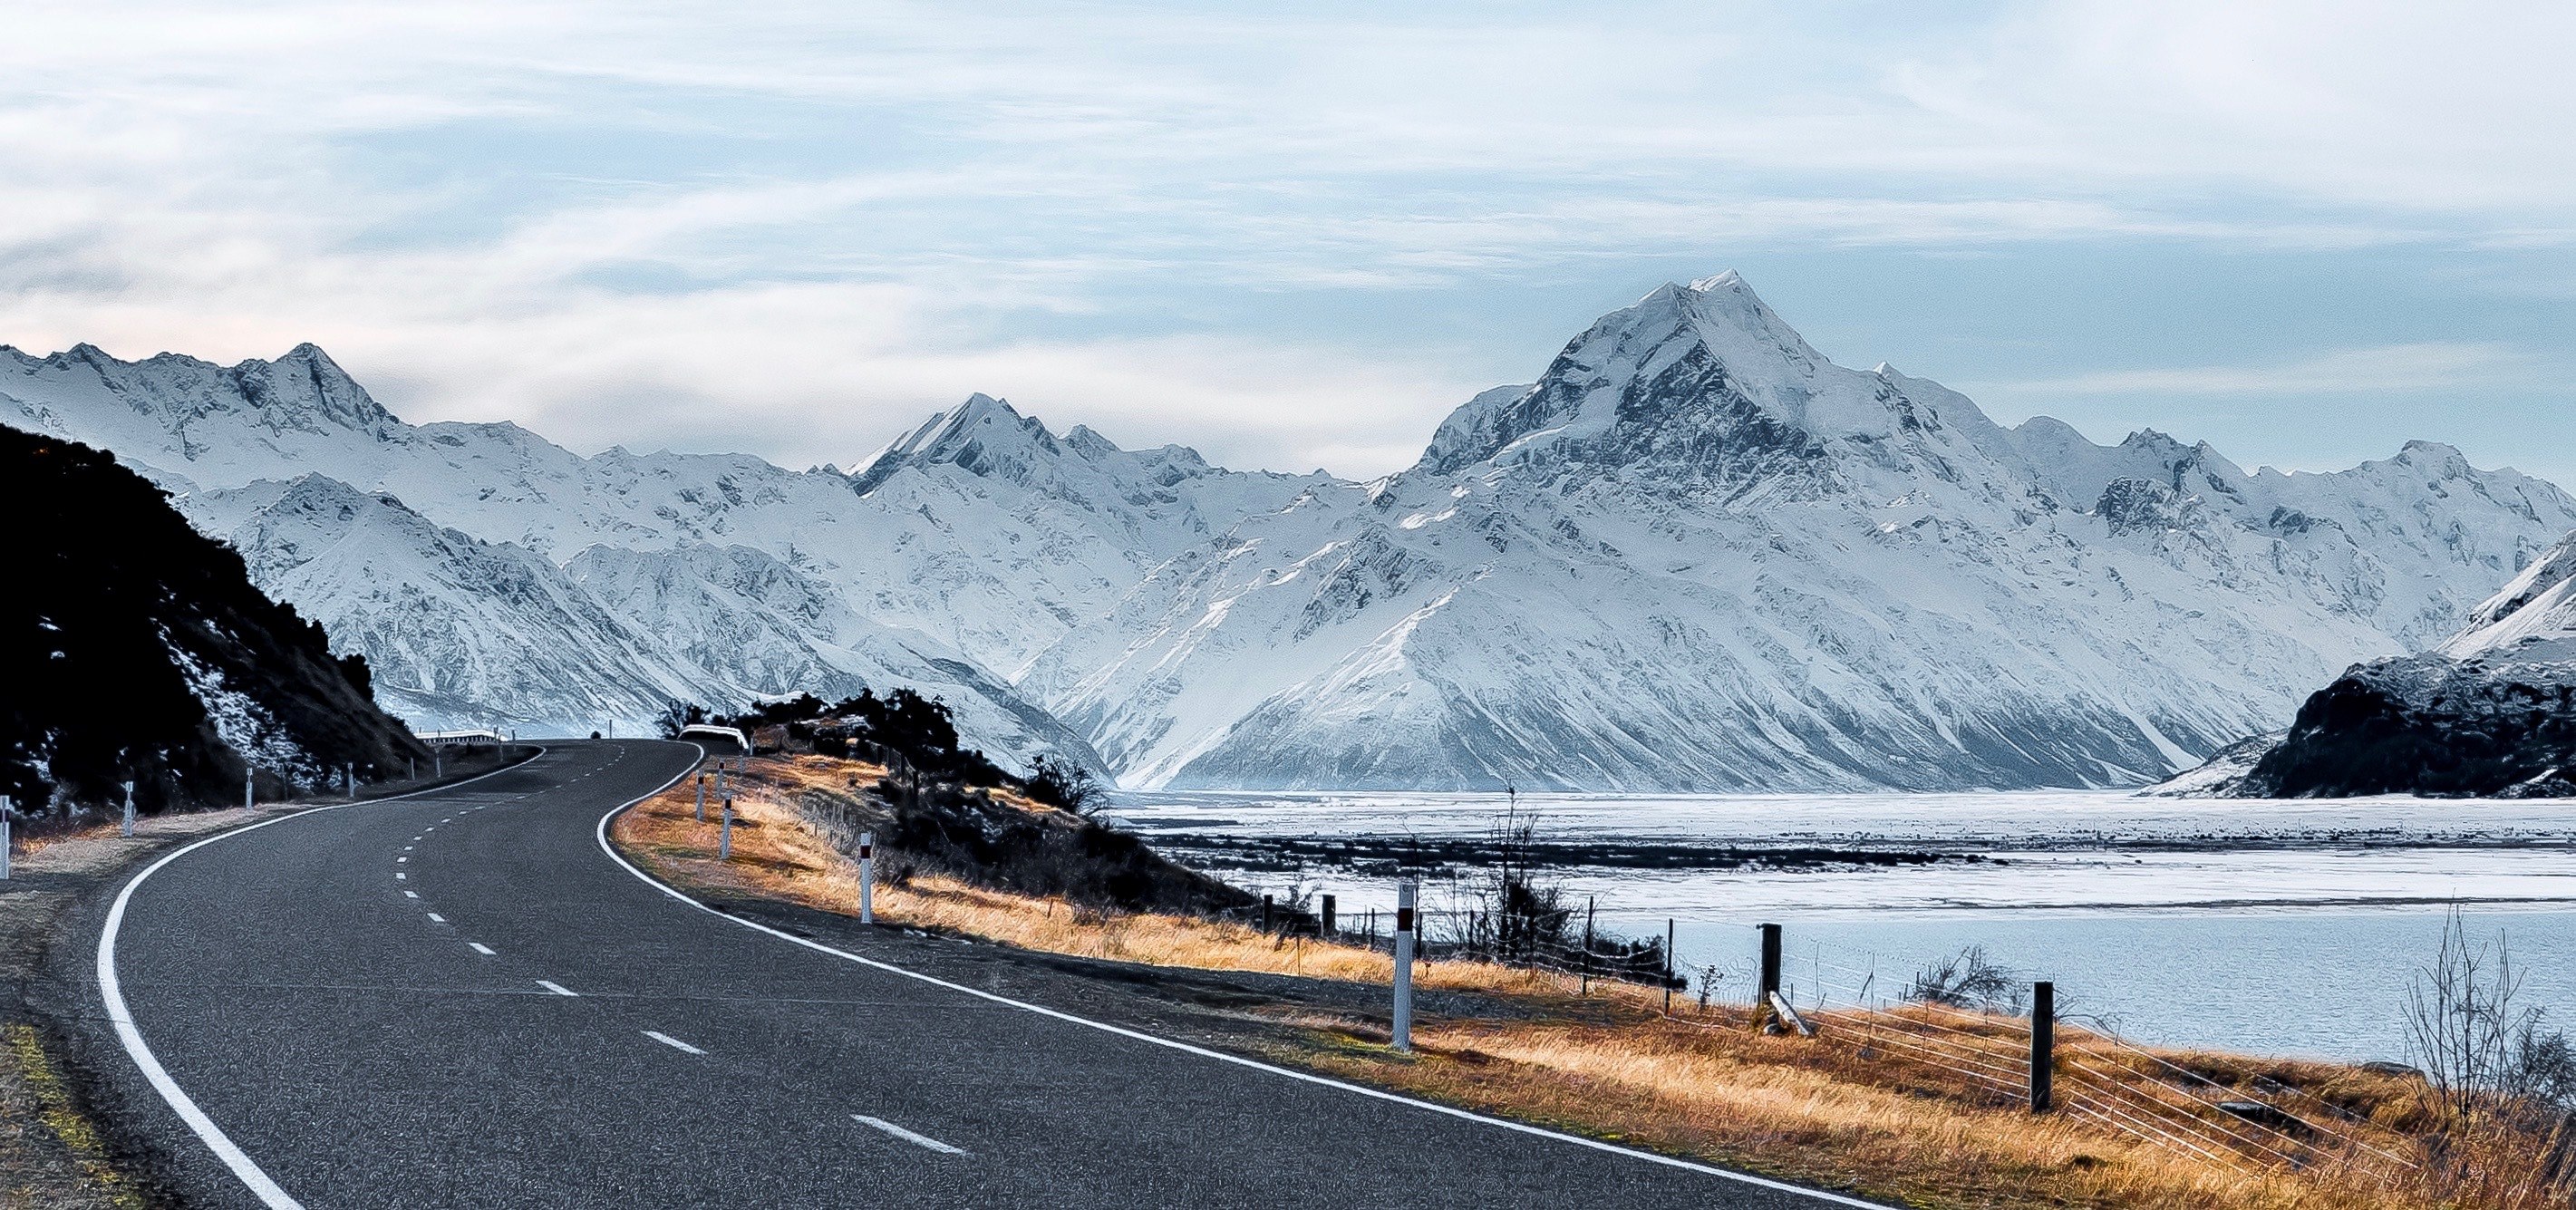 Wallpaper Id Road Mountain Snowy And Landscape